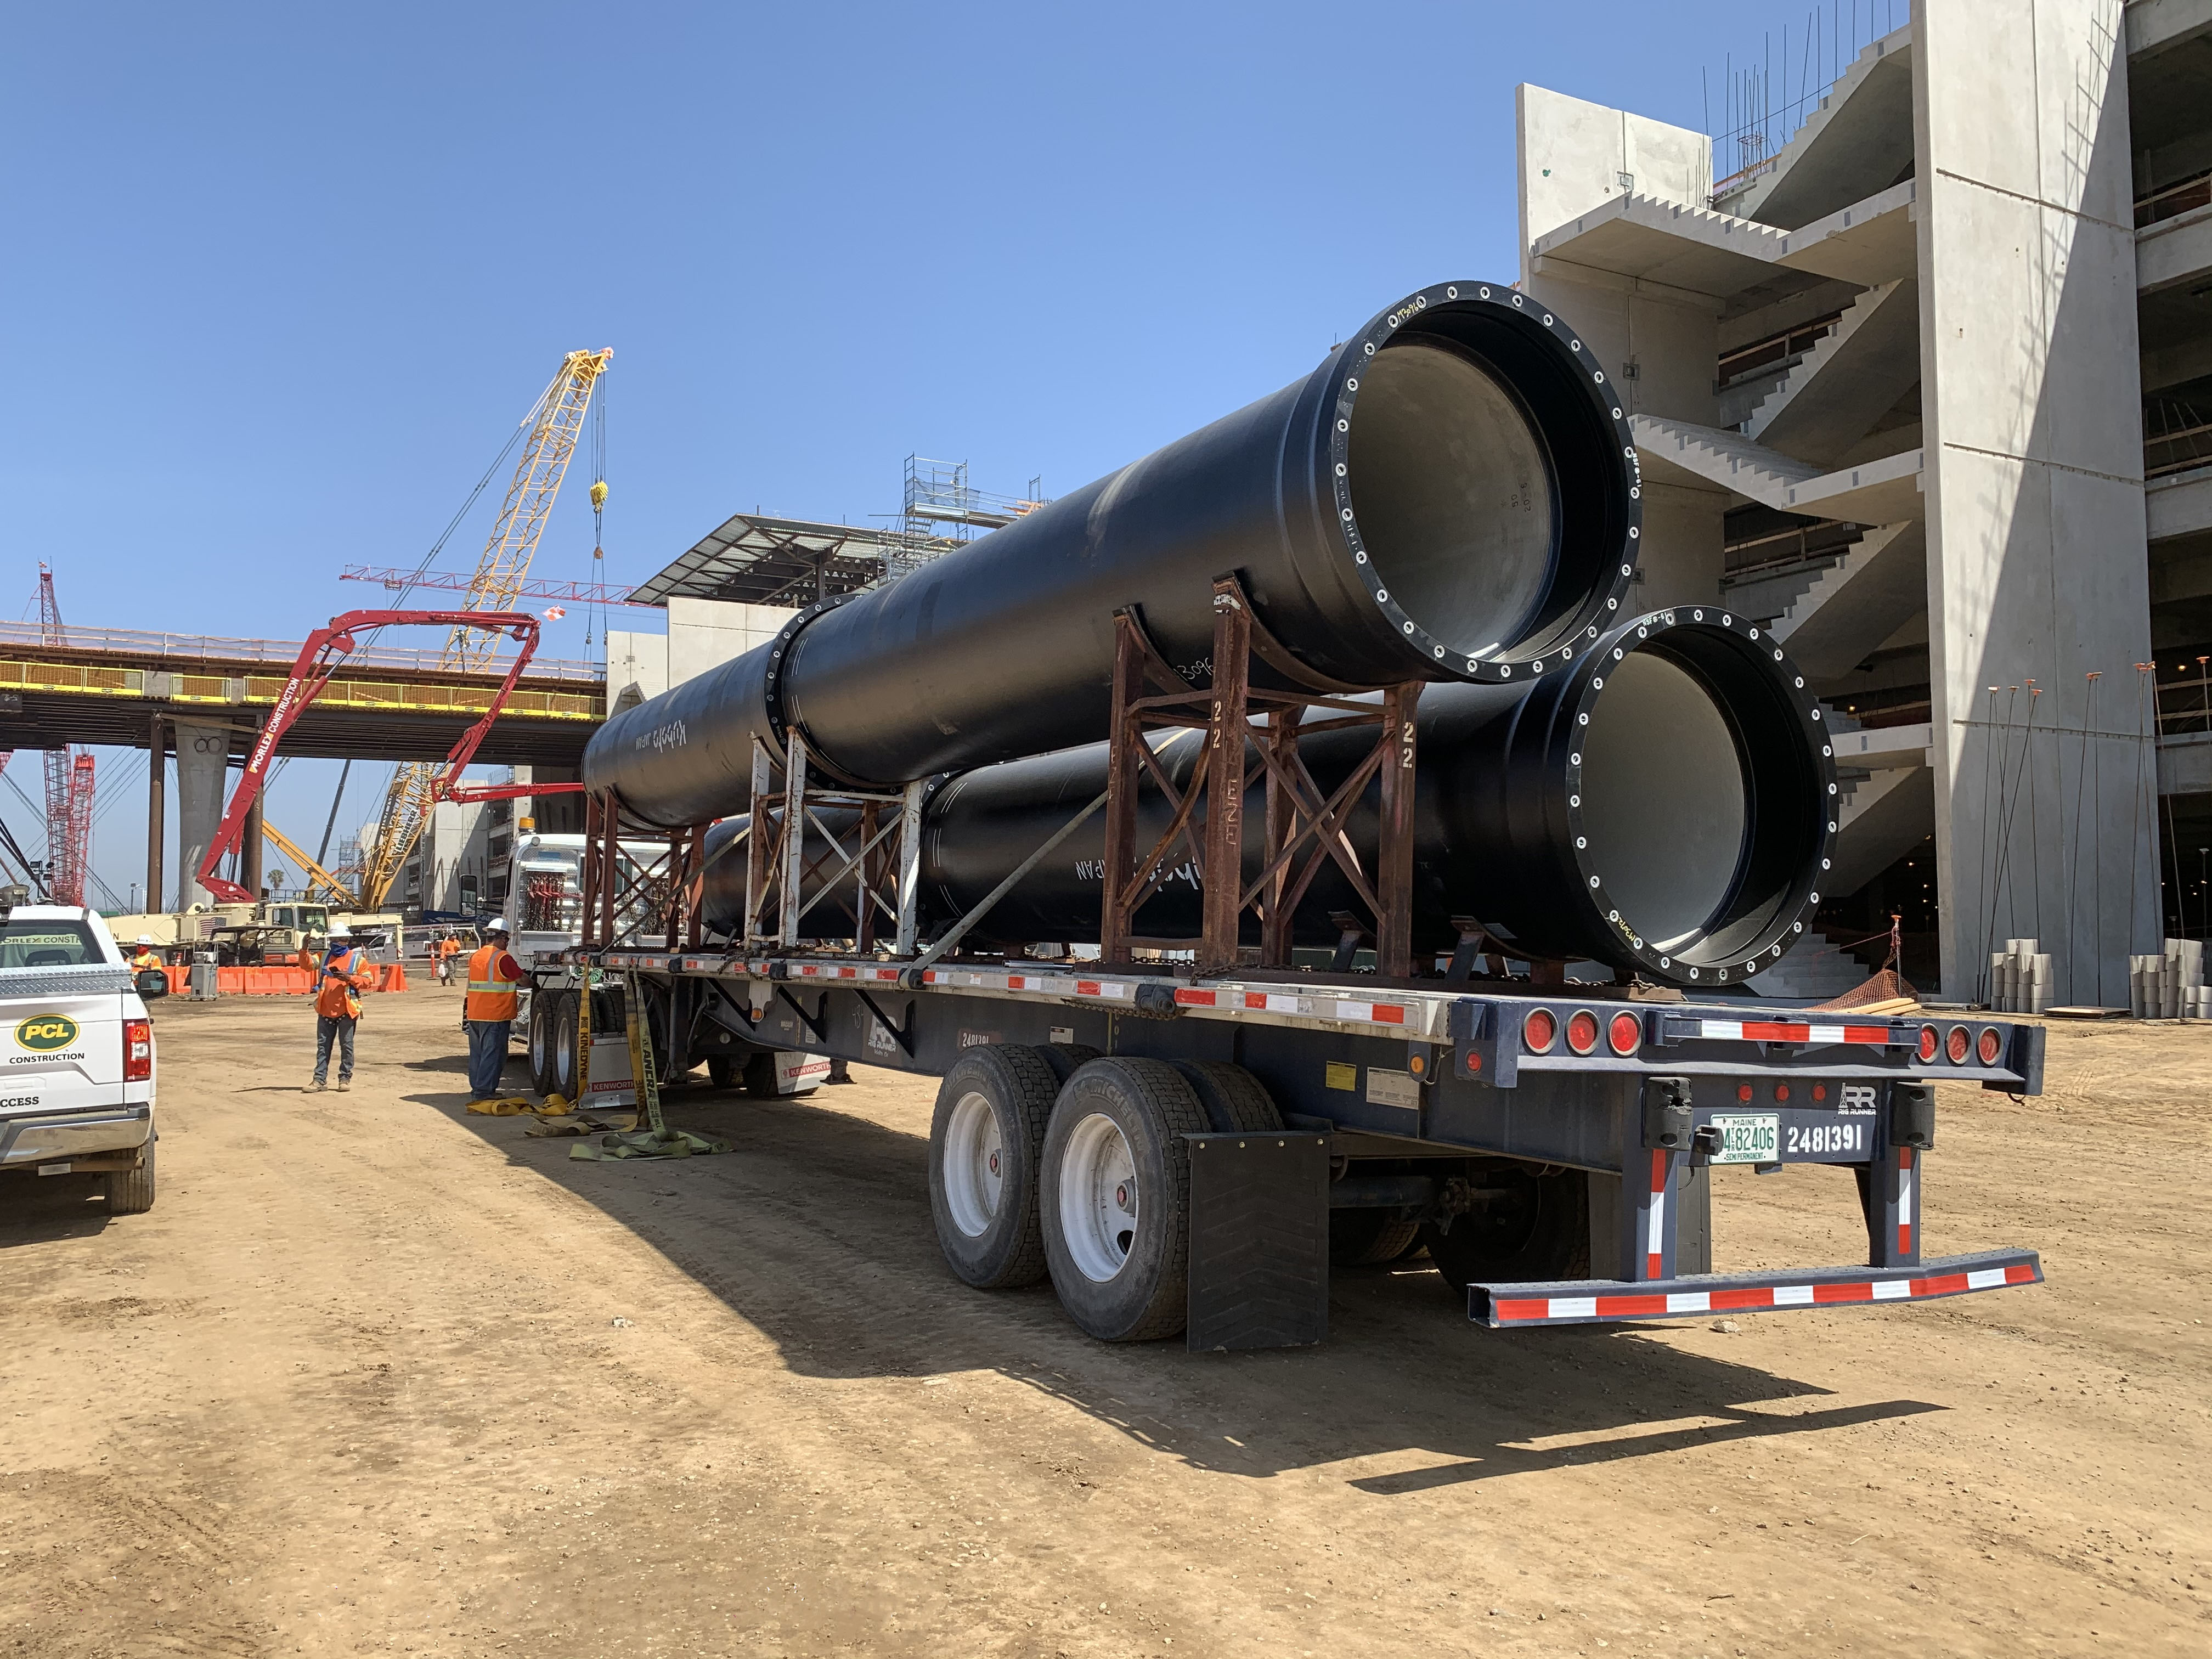 Delivery of four 48-inch Earthquake Resistant Ductile Iron Pipe sections at the Consolidated Rent-A-Car facility for the Los Angeles Department of Water and Power’s Century Trunk Line Project. 